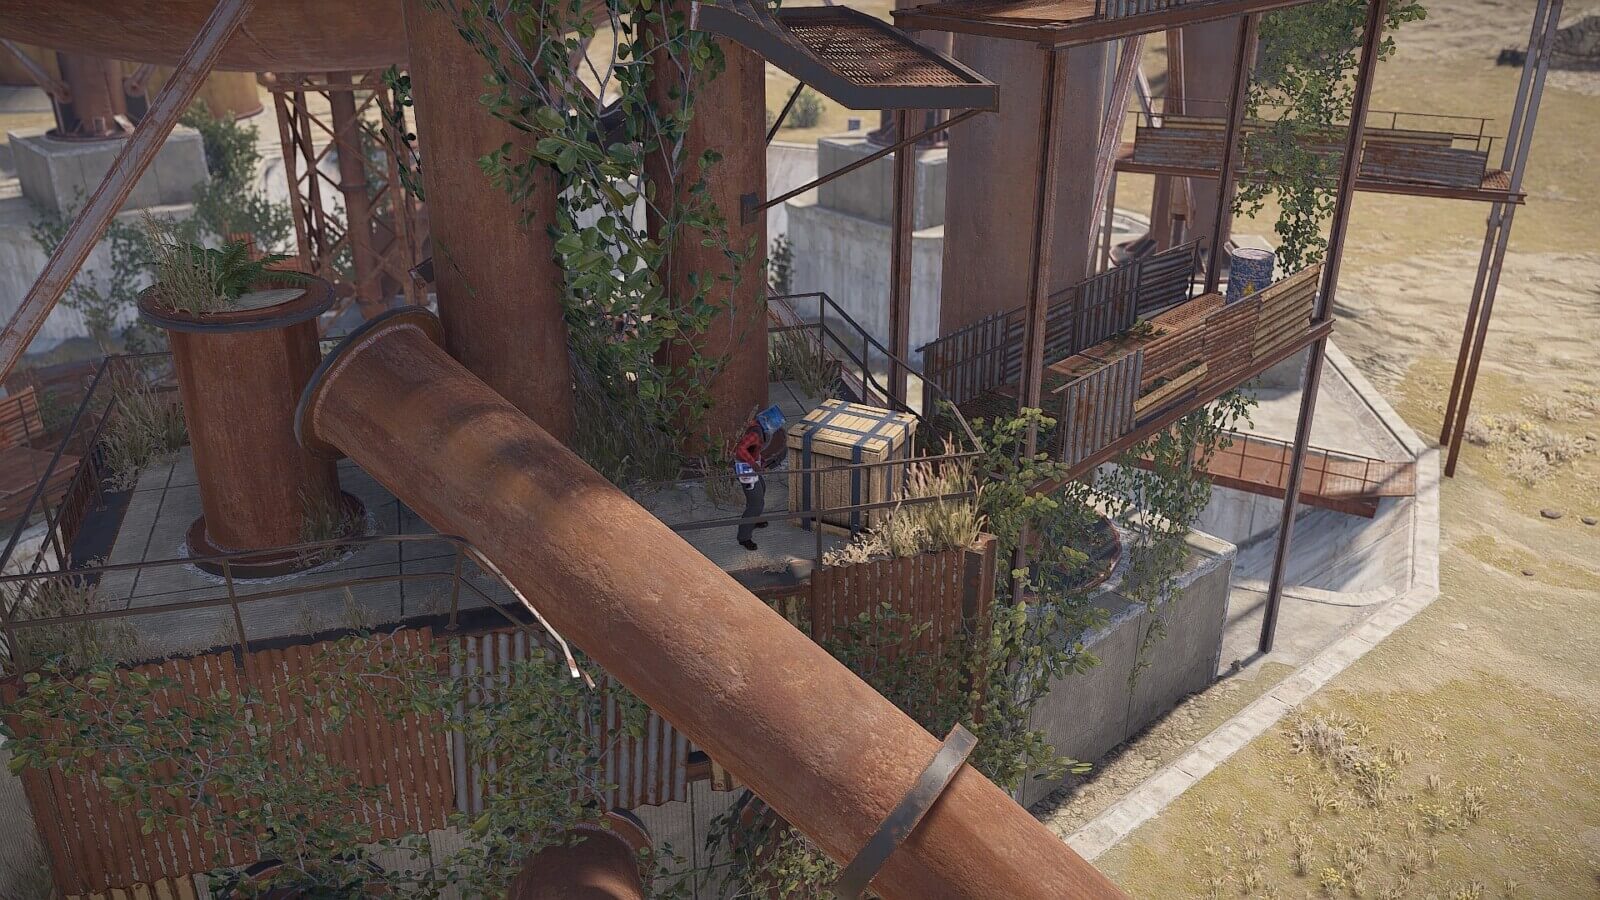 At the very start of the climb on the Sphere Tank you'll find a brown crate and a normal barrel spawn.